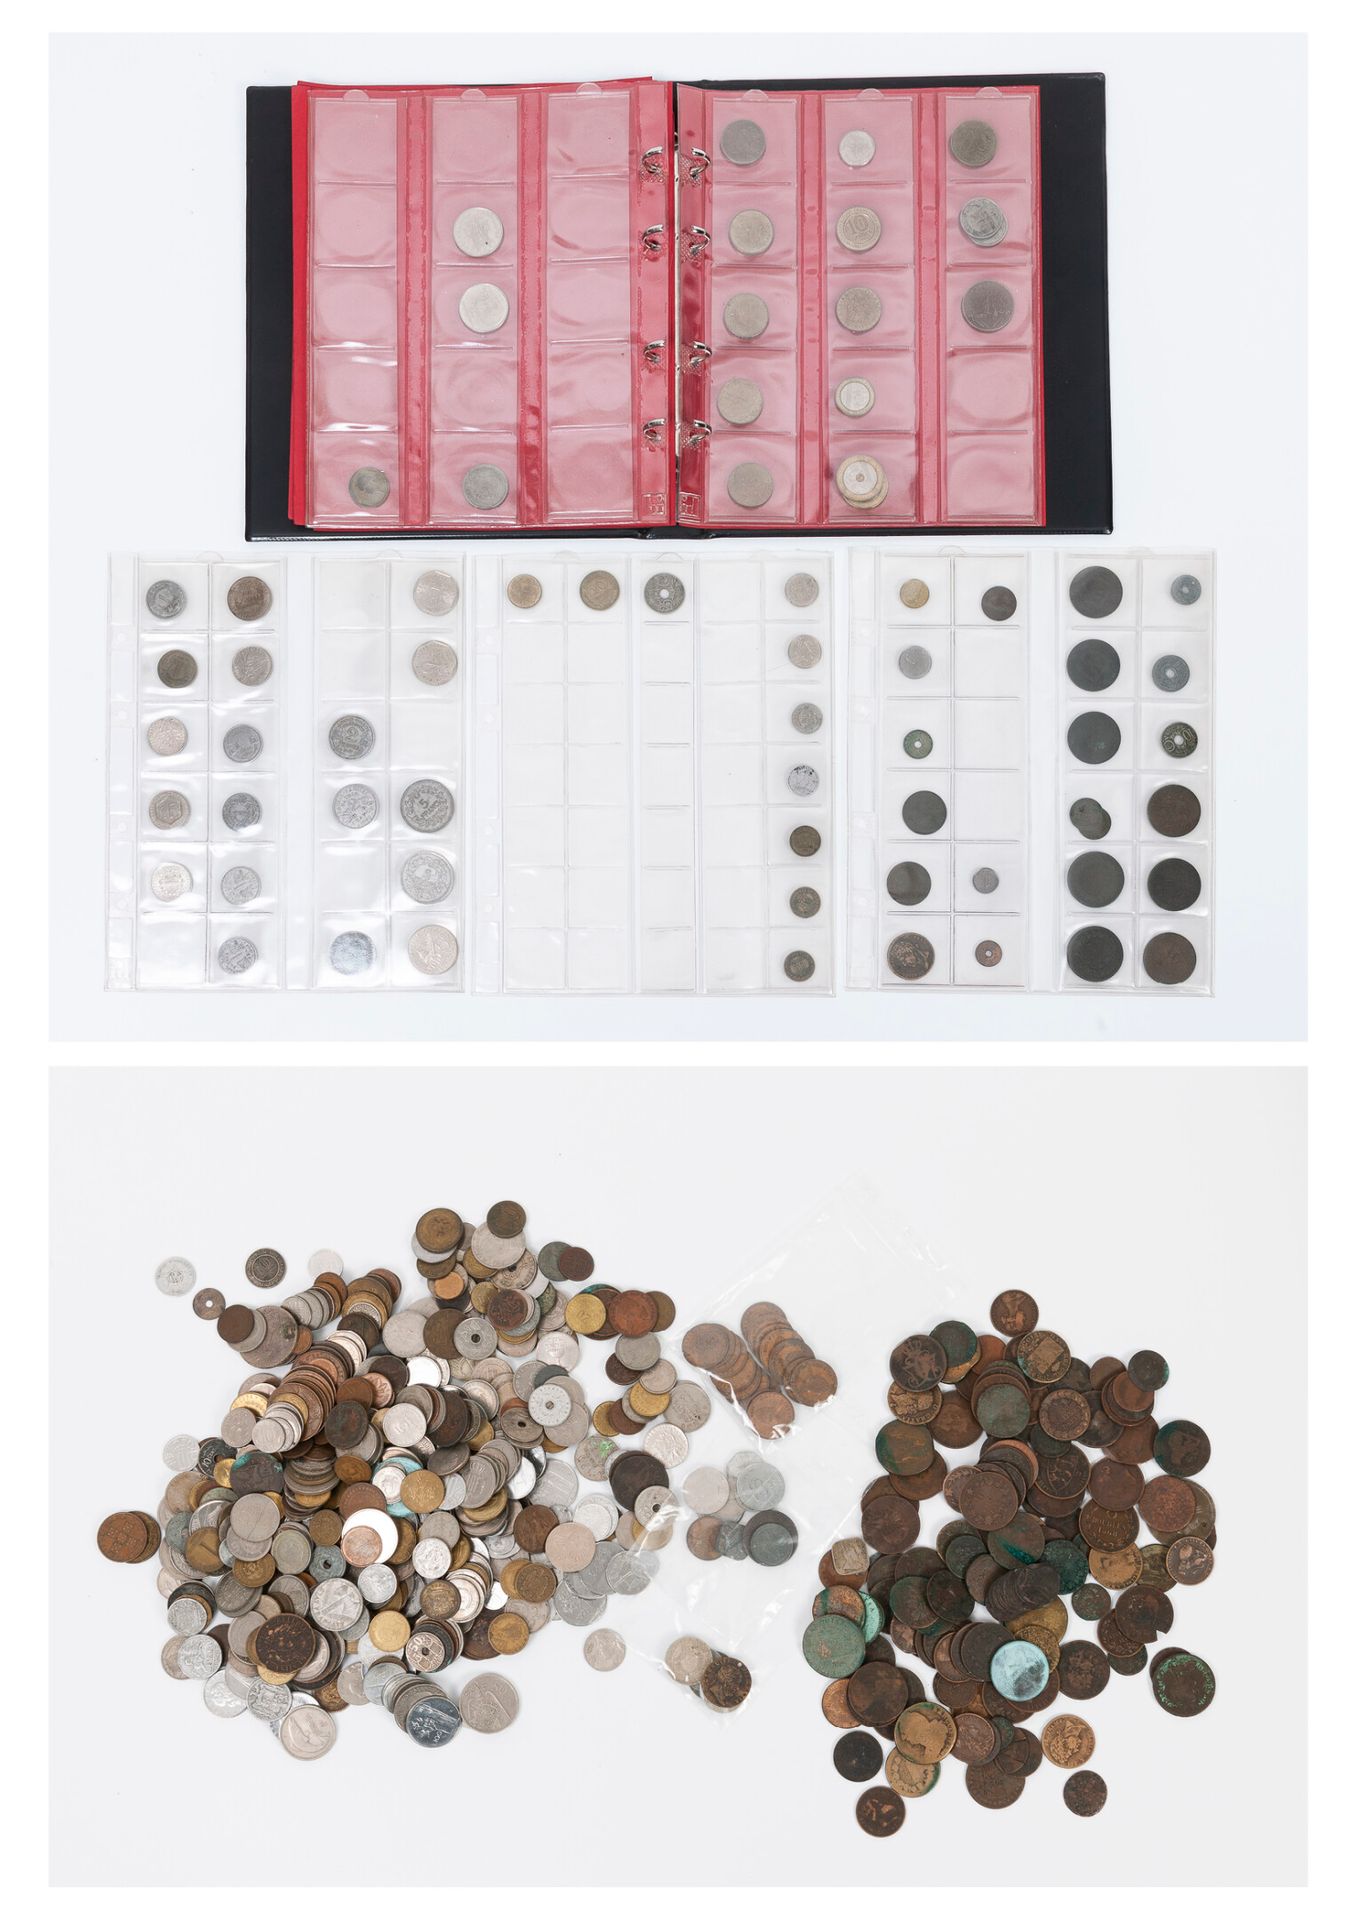 TOUS PAYS, XIXème-XXème siècles Coins and some tokens in metal or copper.

Some &hellip;